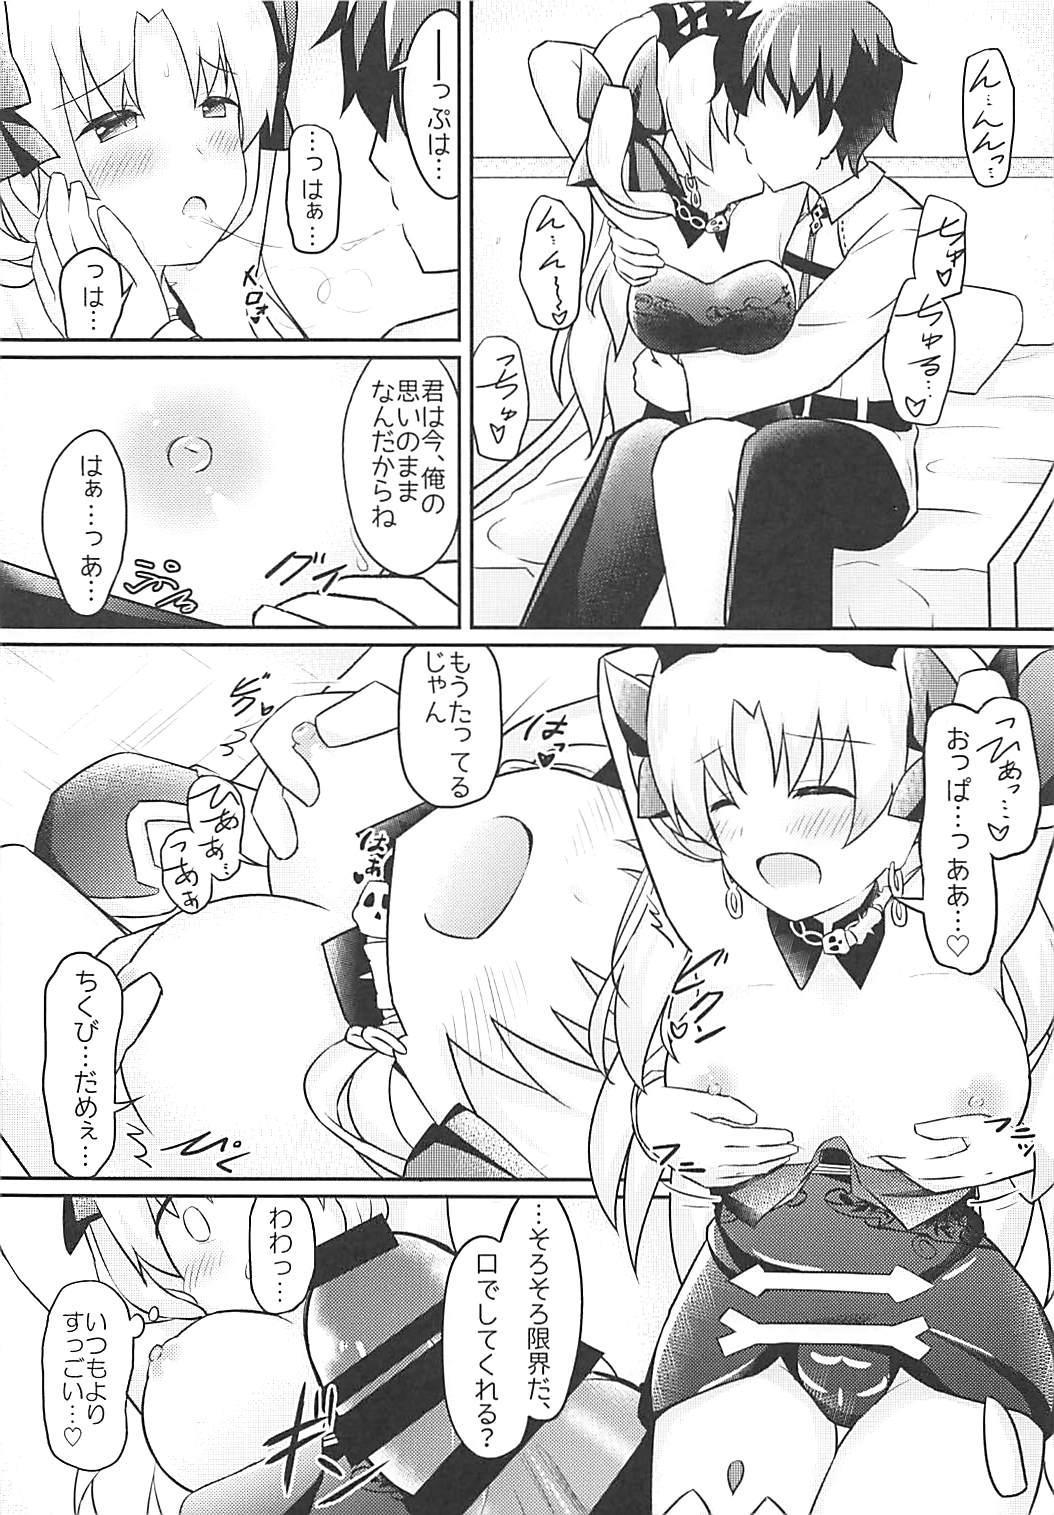 Public Nudity Do-M Megami no Ereshkigal - Fate grand order Fuck Pussy - Page 5